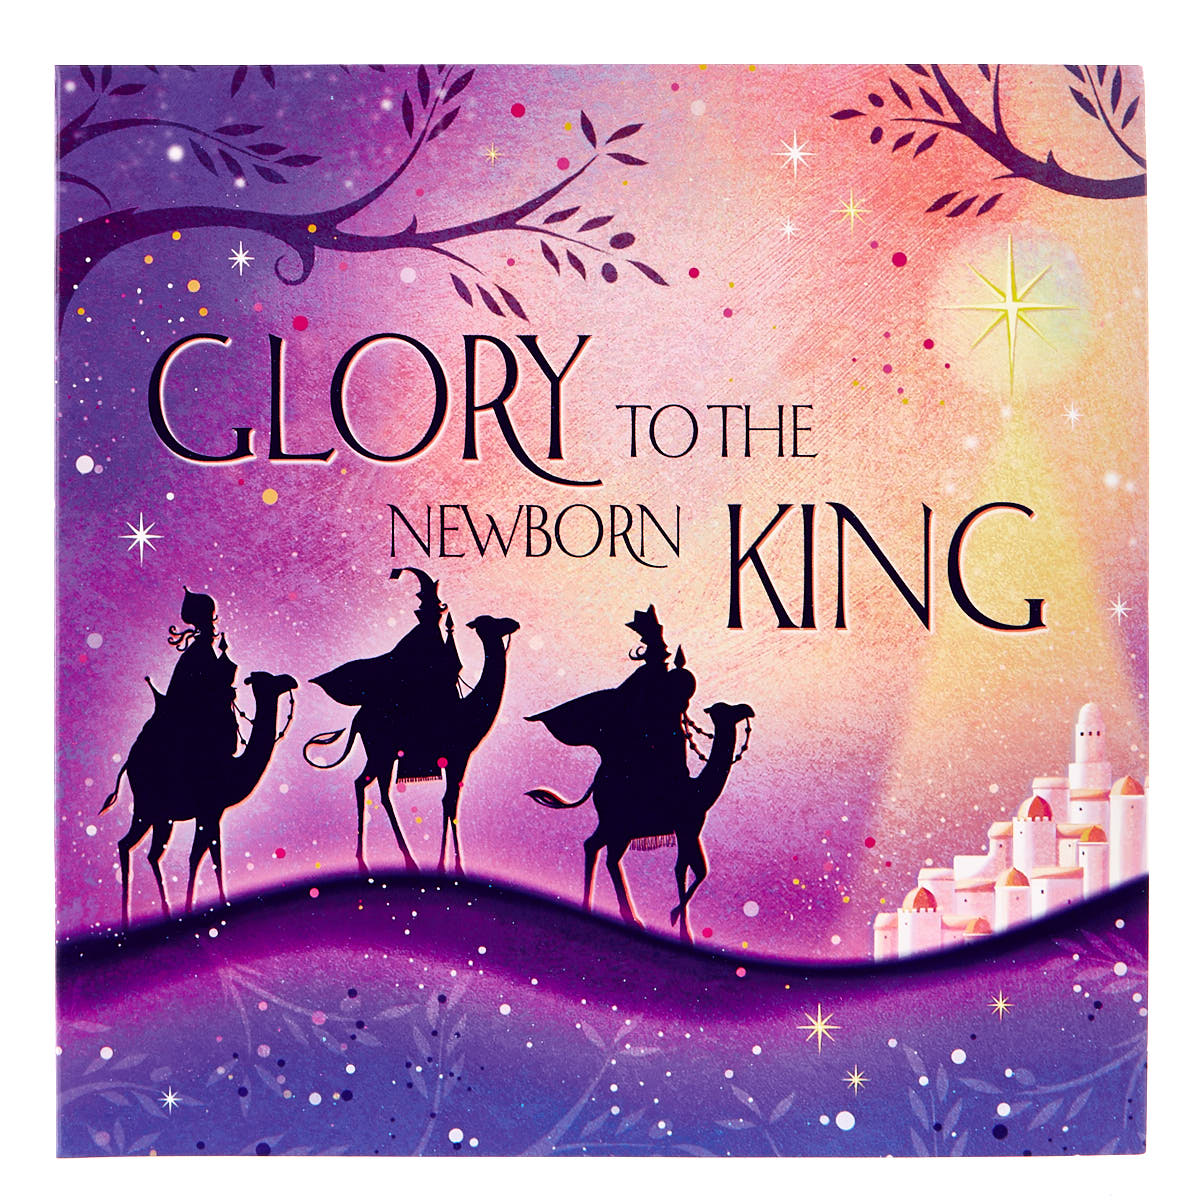 Charity Christmas Cards - 3 Wise Men Pack Of 10